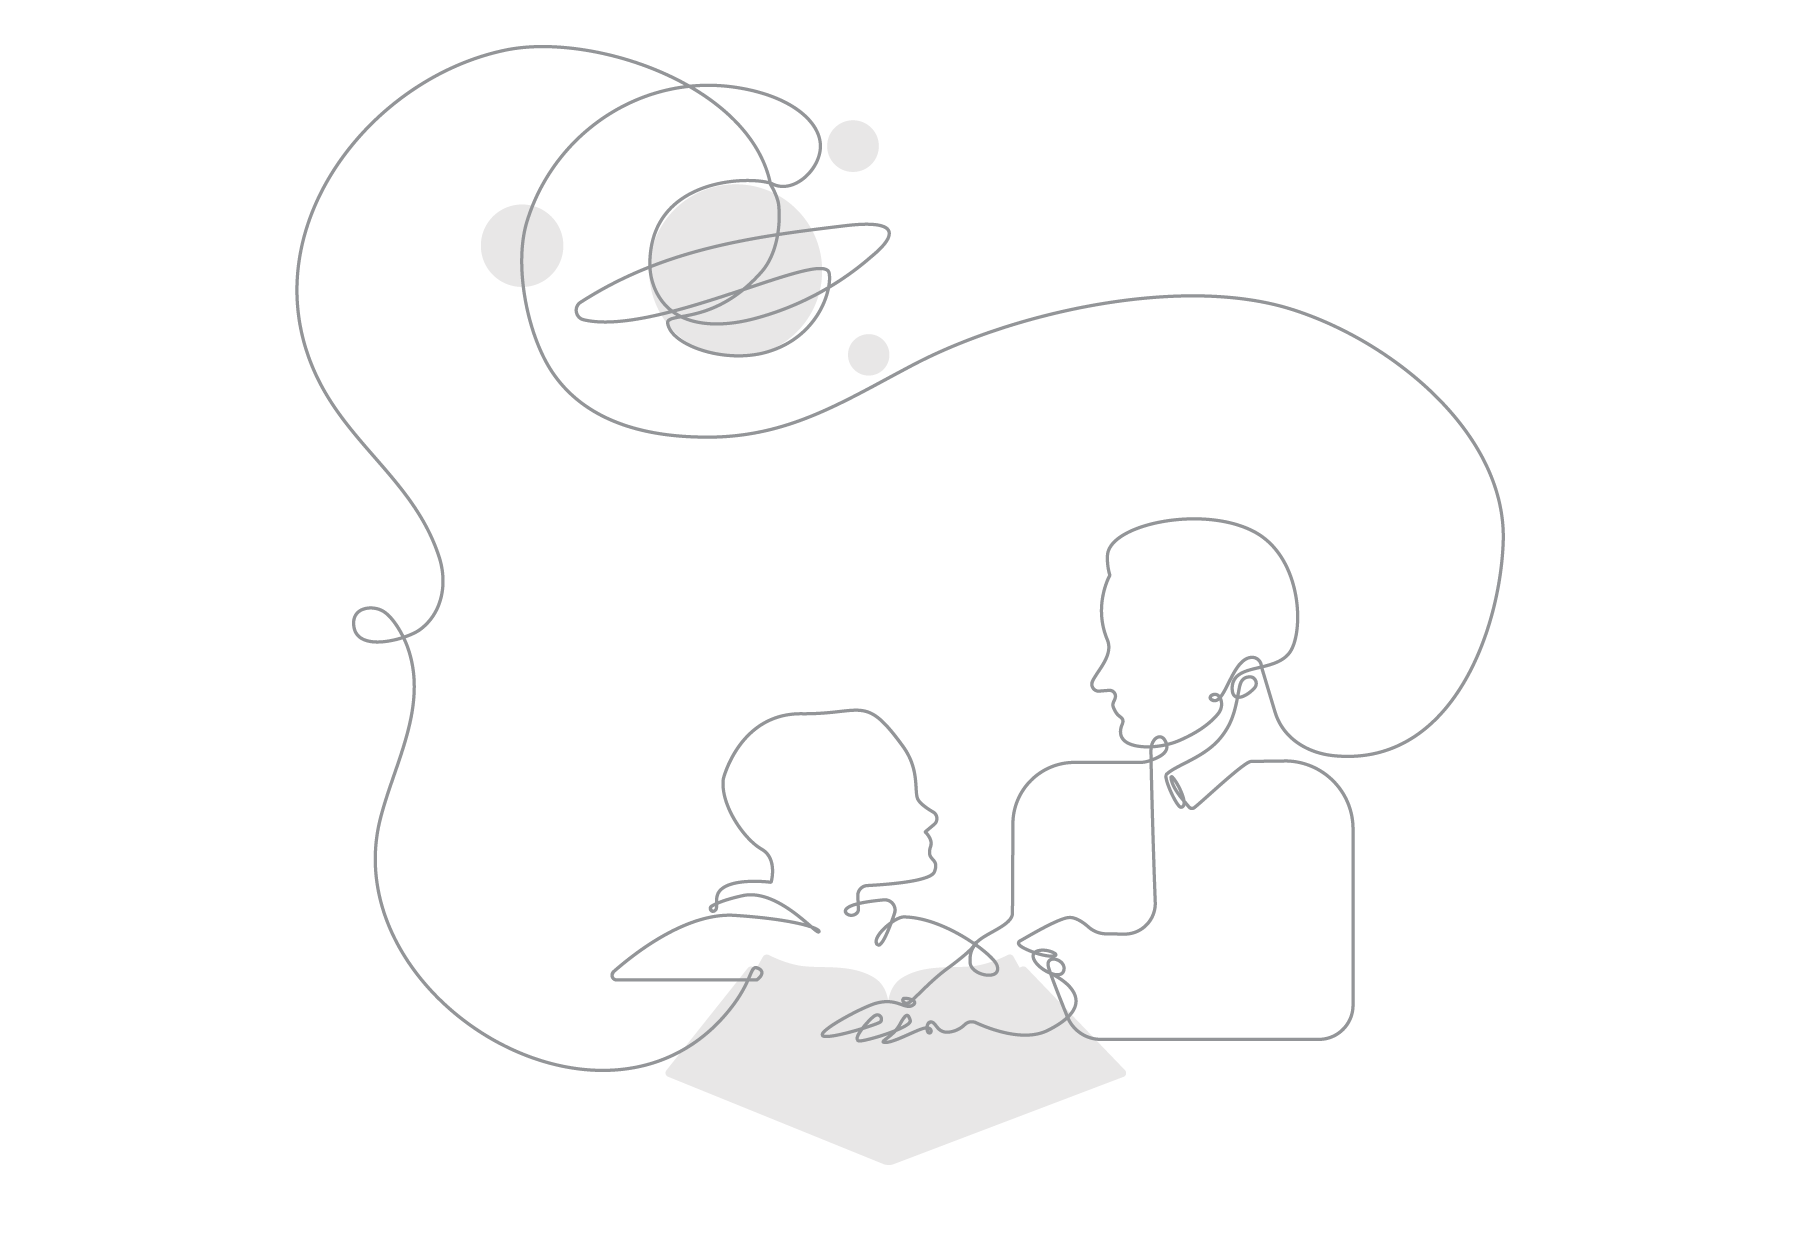 Two stylized, faceless figures seated at a table, engaging in conversation with abstract, flowing lines and circles above them suggesting communication or ideas related to gold standard research.